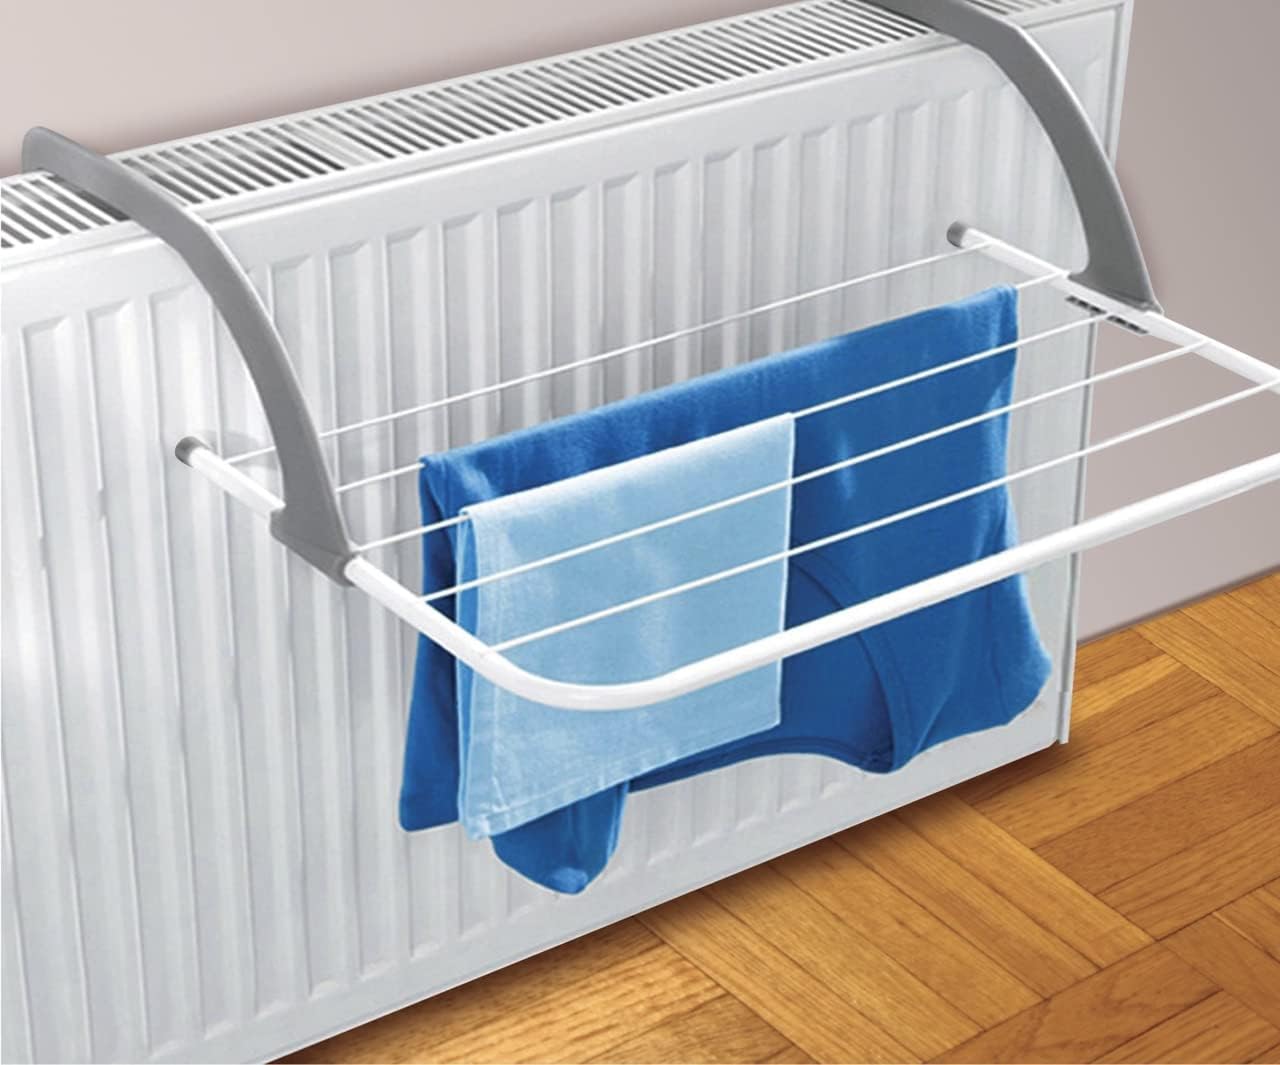 ADEPTNA Folding Radiator Cloth Airer Rack - Clothes Laundry Dryer Portable – Great for Radiators Baths and Doors (2 PACK)ADEPTNA Folding Radiator Cloth Airer Rack - Clothes Laundry Dryer Portable – Great for Radiators Baths and Doors (2 PACK)